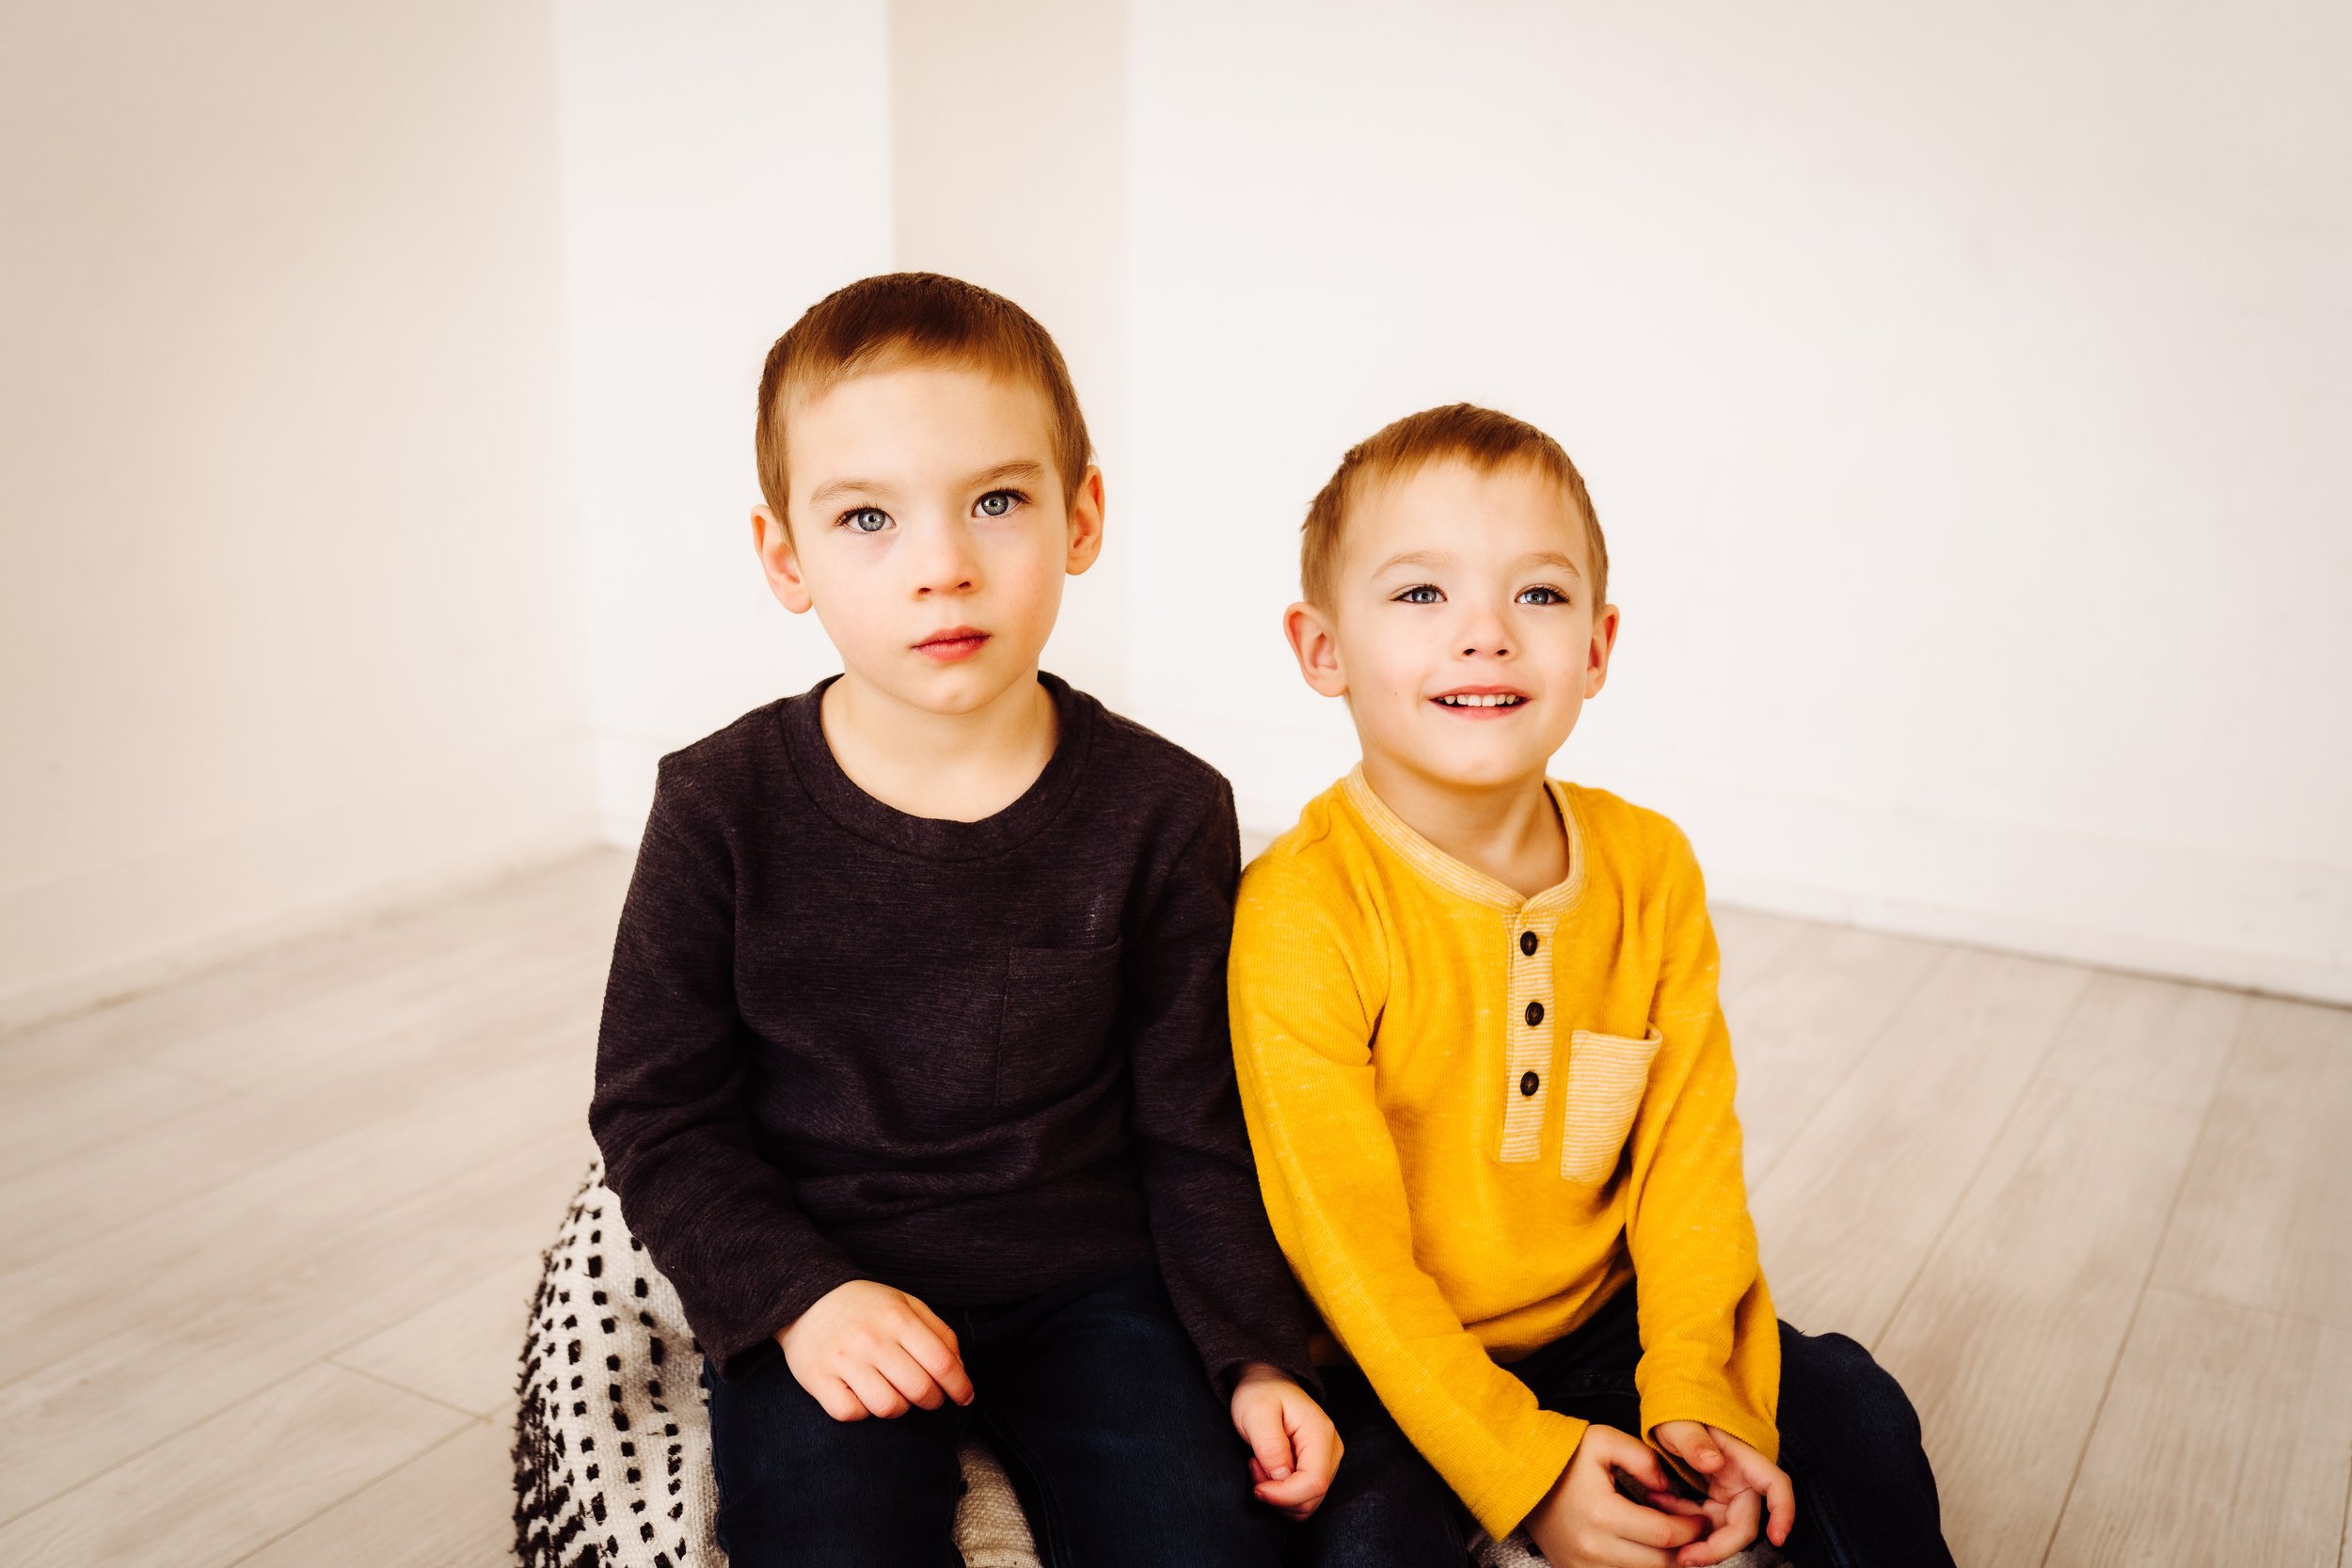 Two brothers sit on pillow and smile at photographer